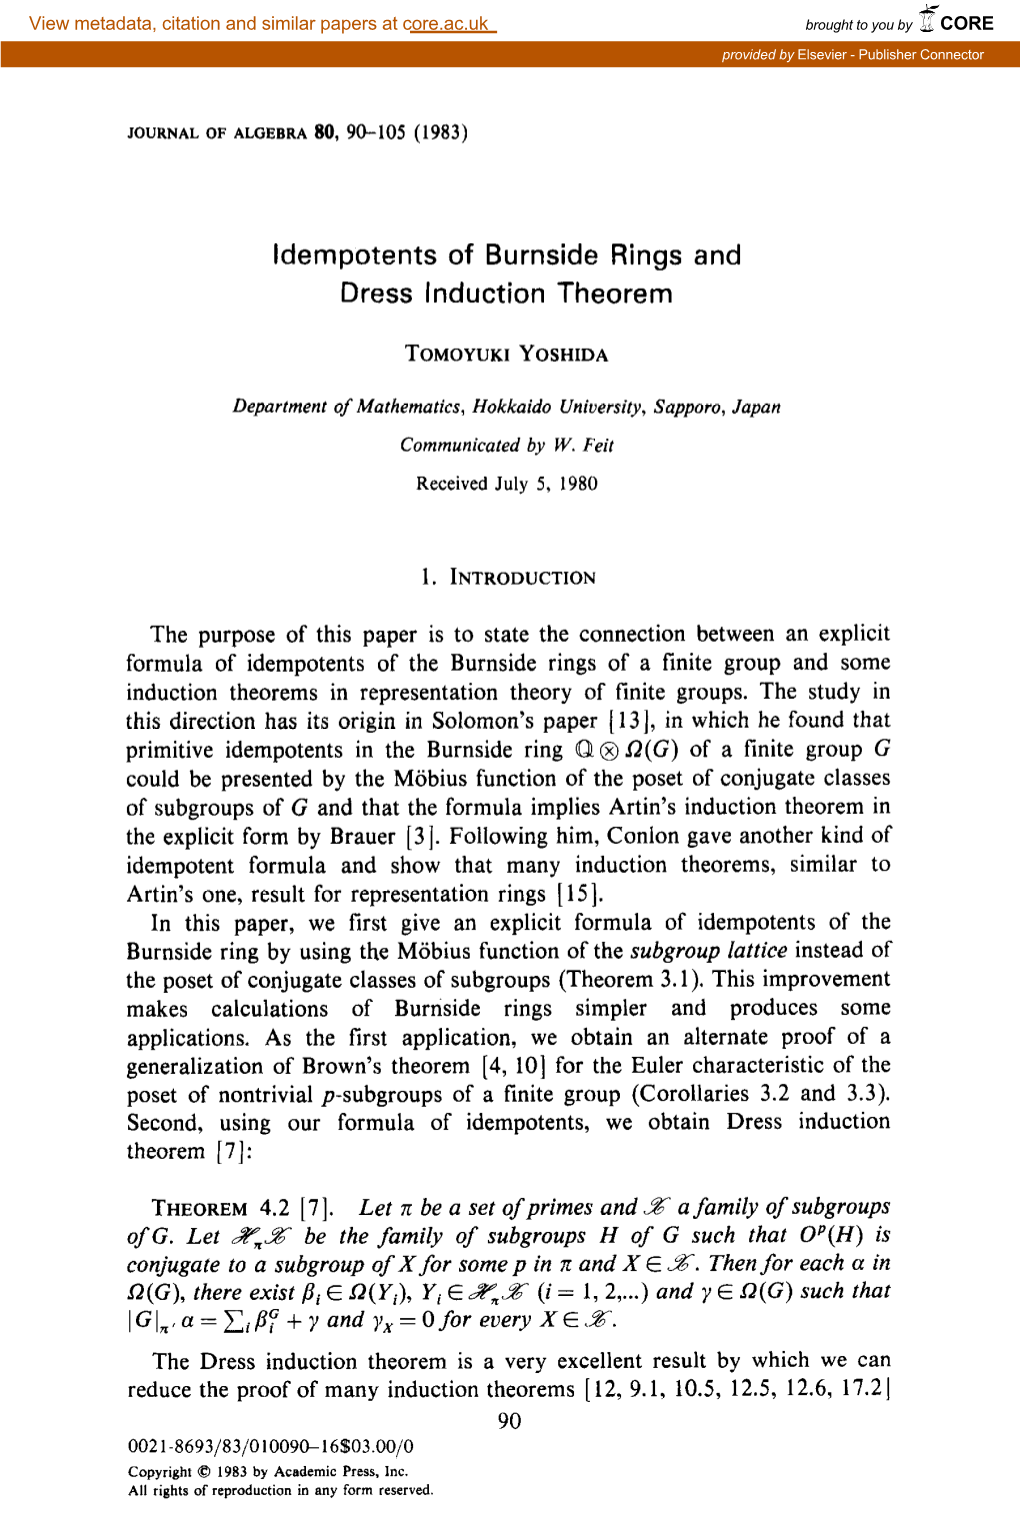 Ldempotents of Burnside Rings and Dress Induction Theorem